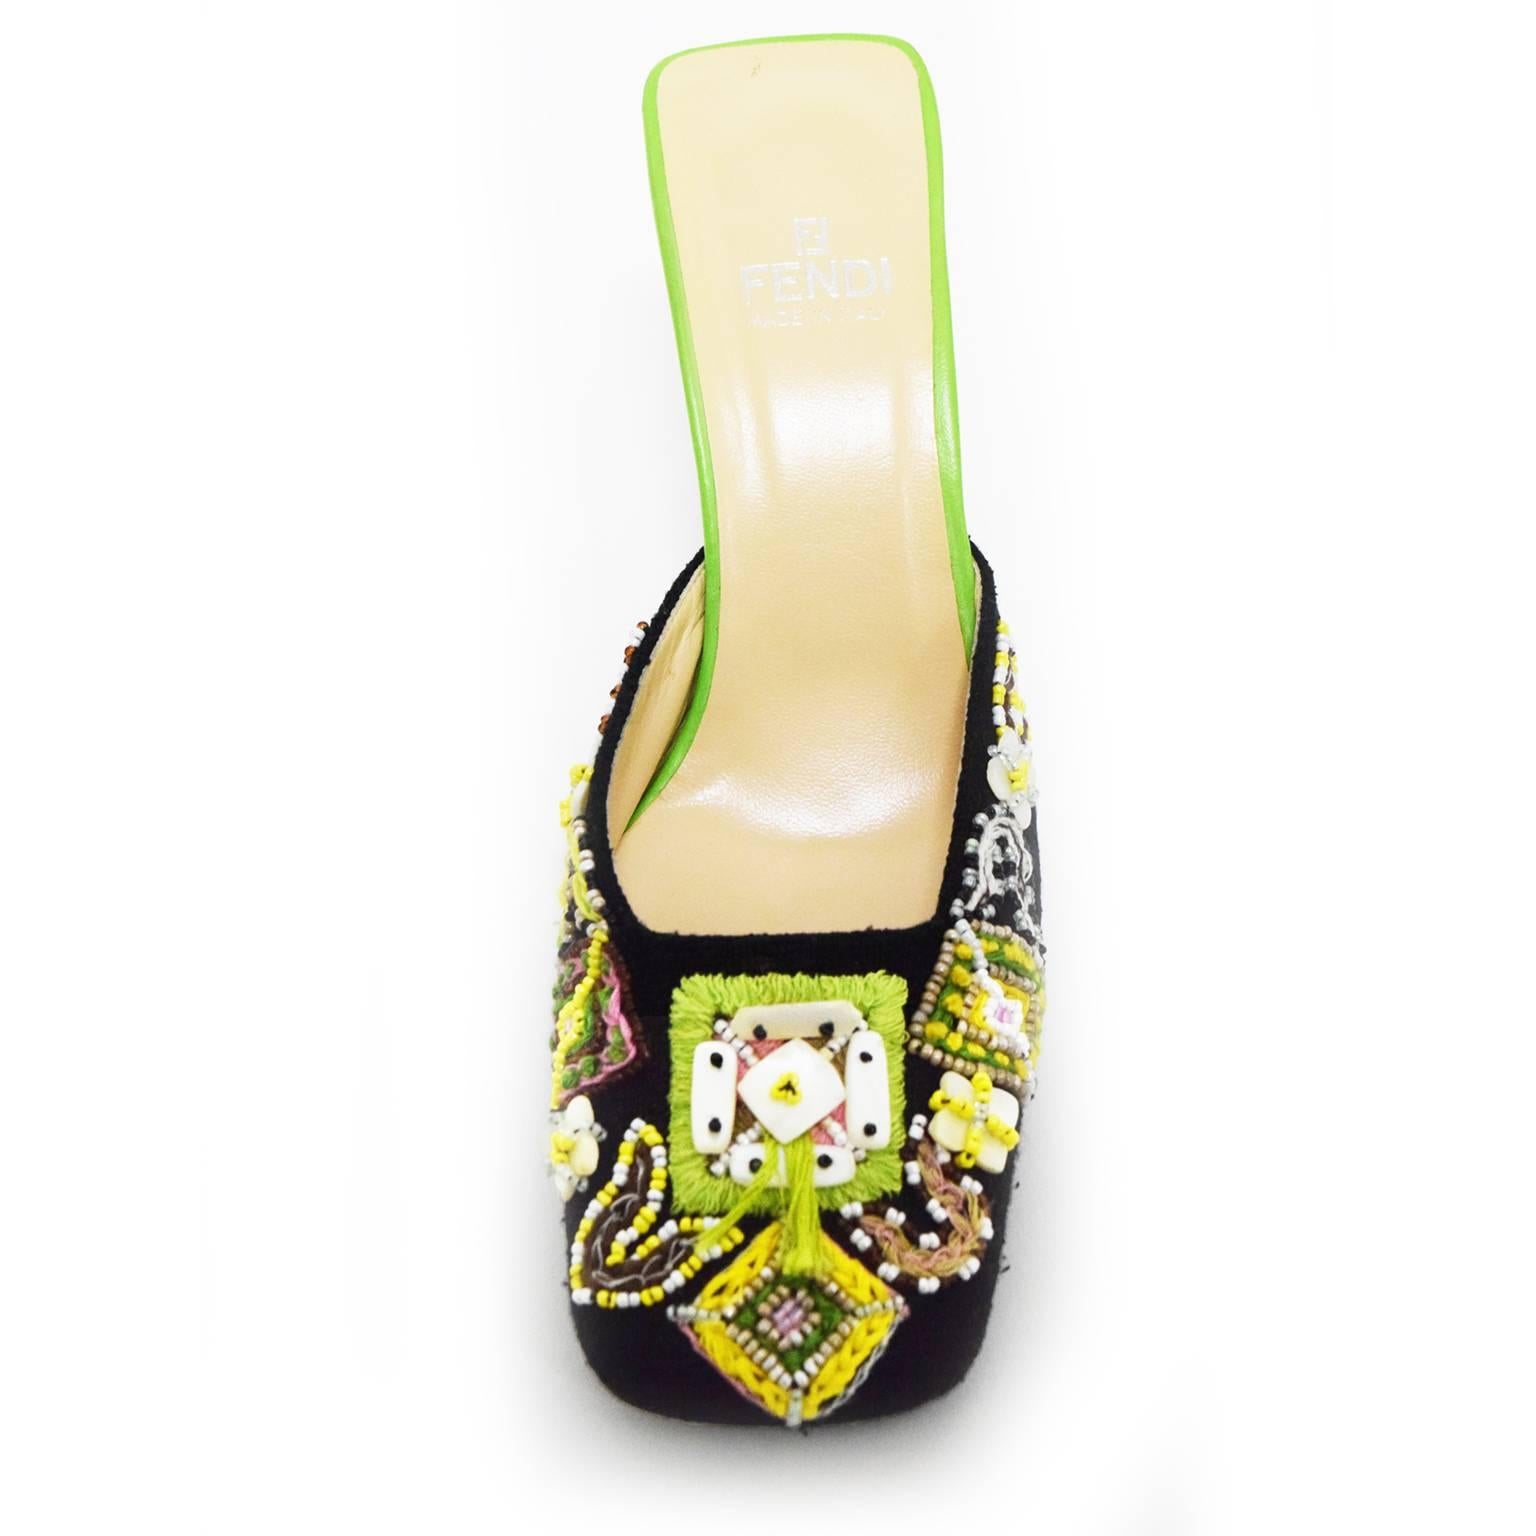 This Fendi hand beaded Mule is any fashion fanatic's collector's piece. In replica to the Fendi handbag, these shoes have a canvas overlay and glass bead and shell embellishments. The heel of the mule shoe is a vibrant green leather which gives it